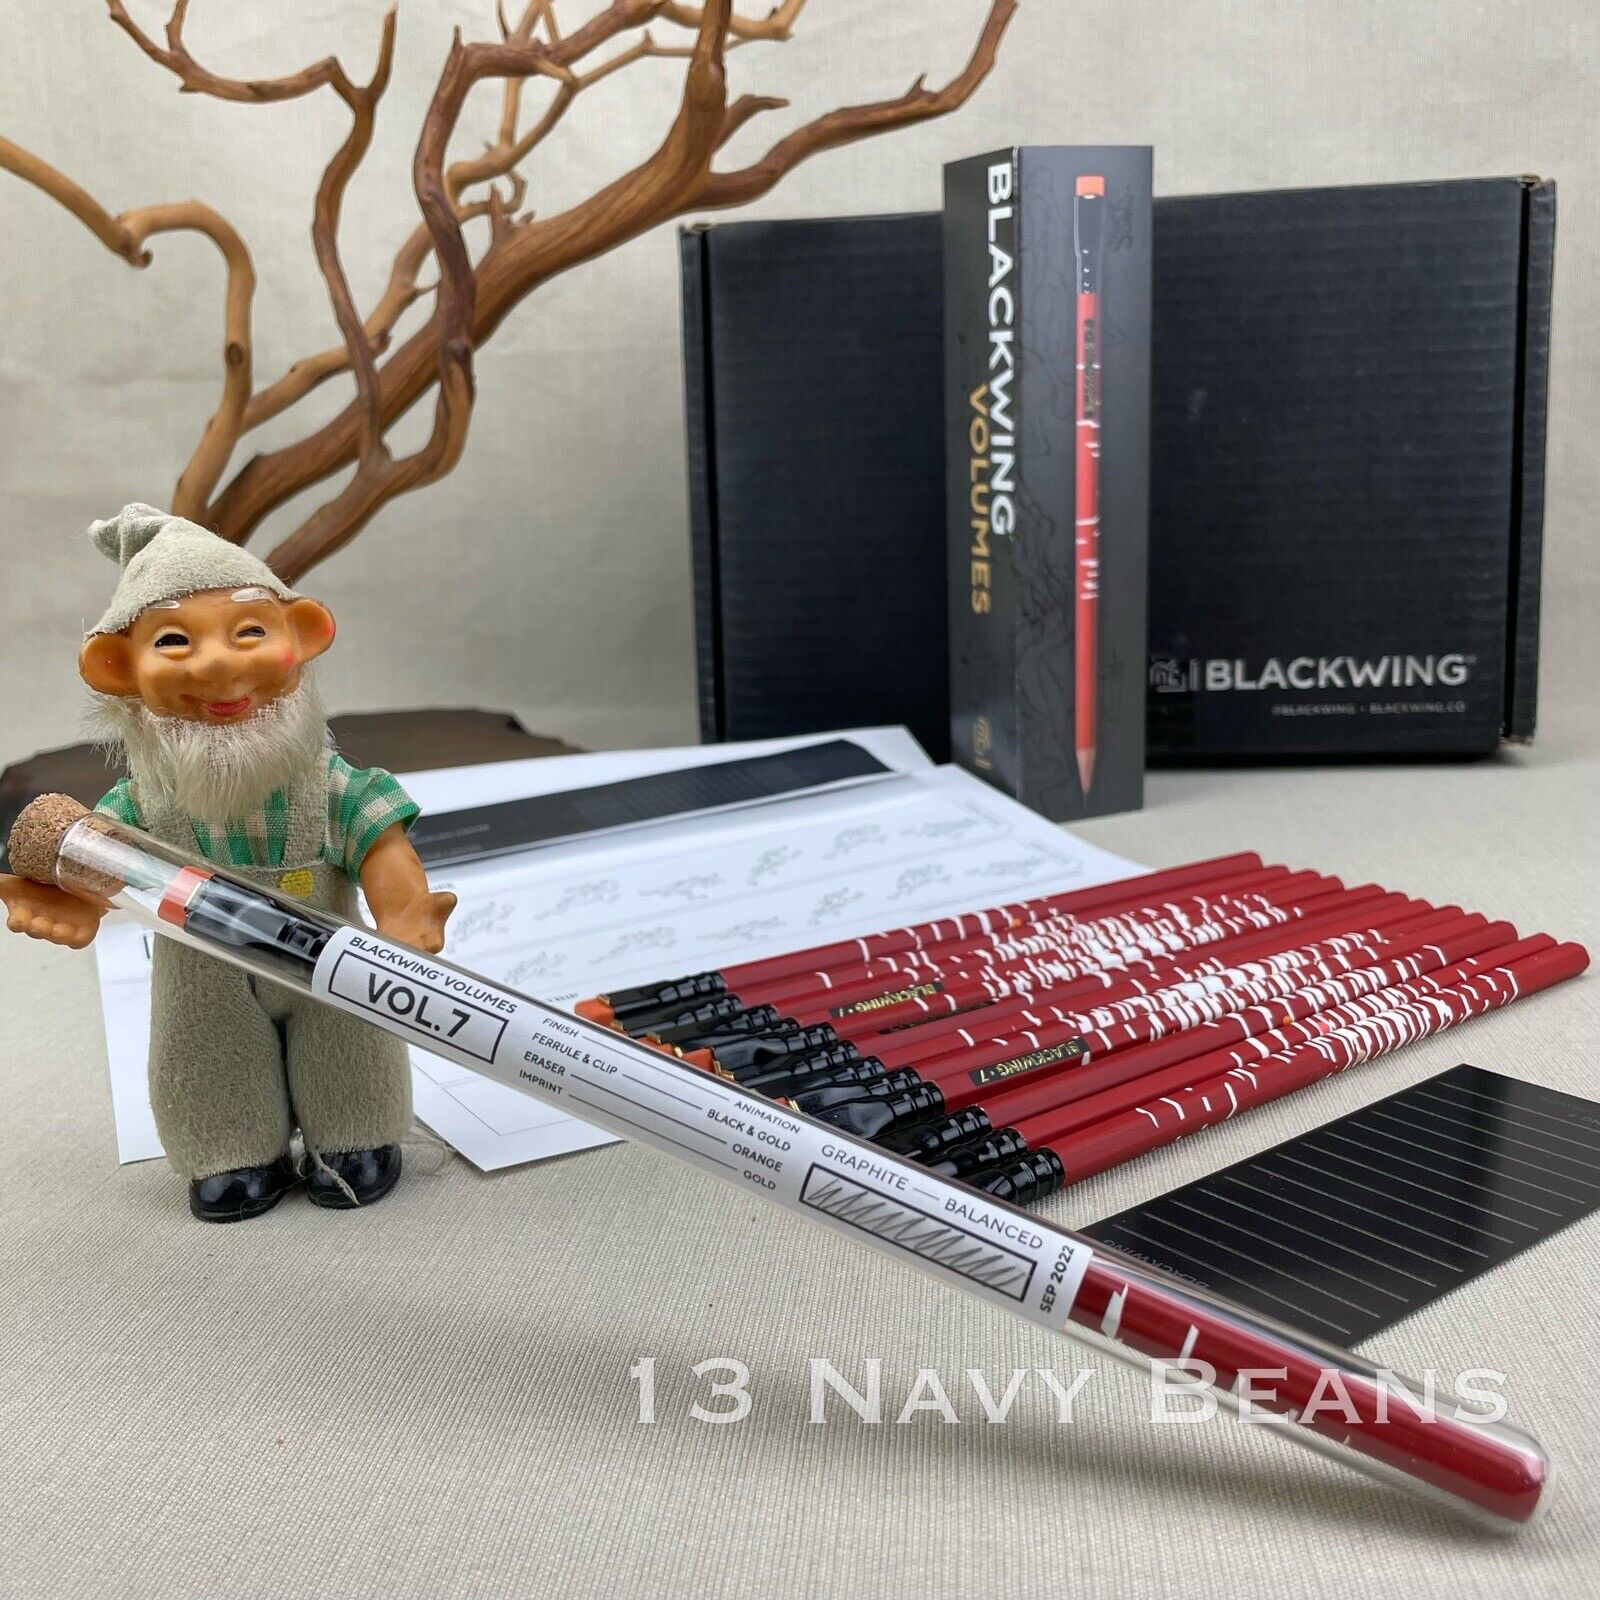 Blackwing Volume 7 Subscription Box ~Animation September 2022 Wile E. Coyote